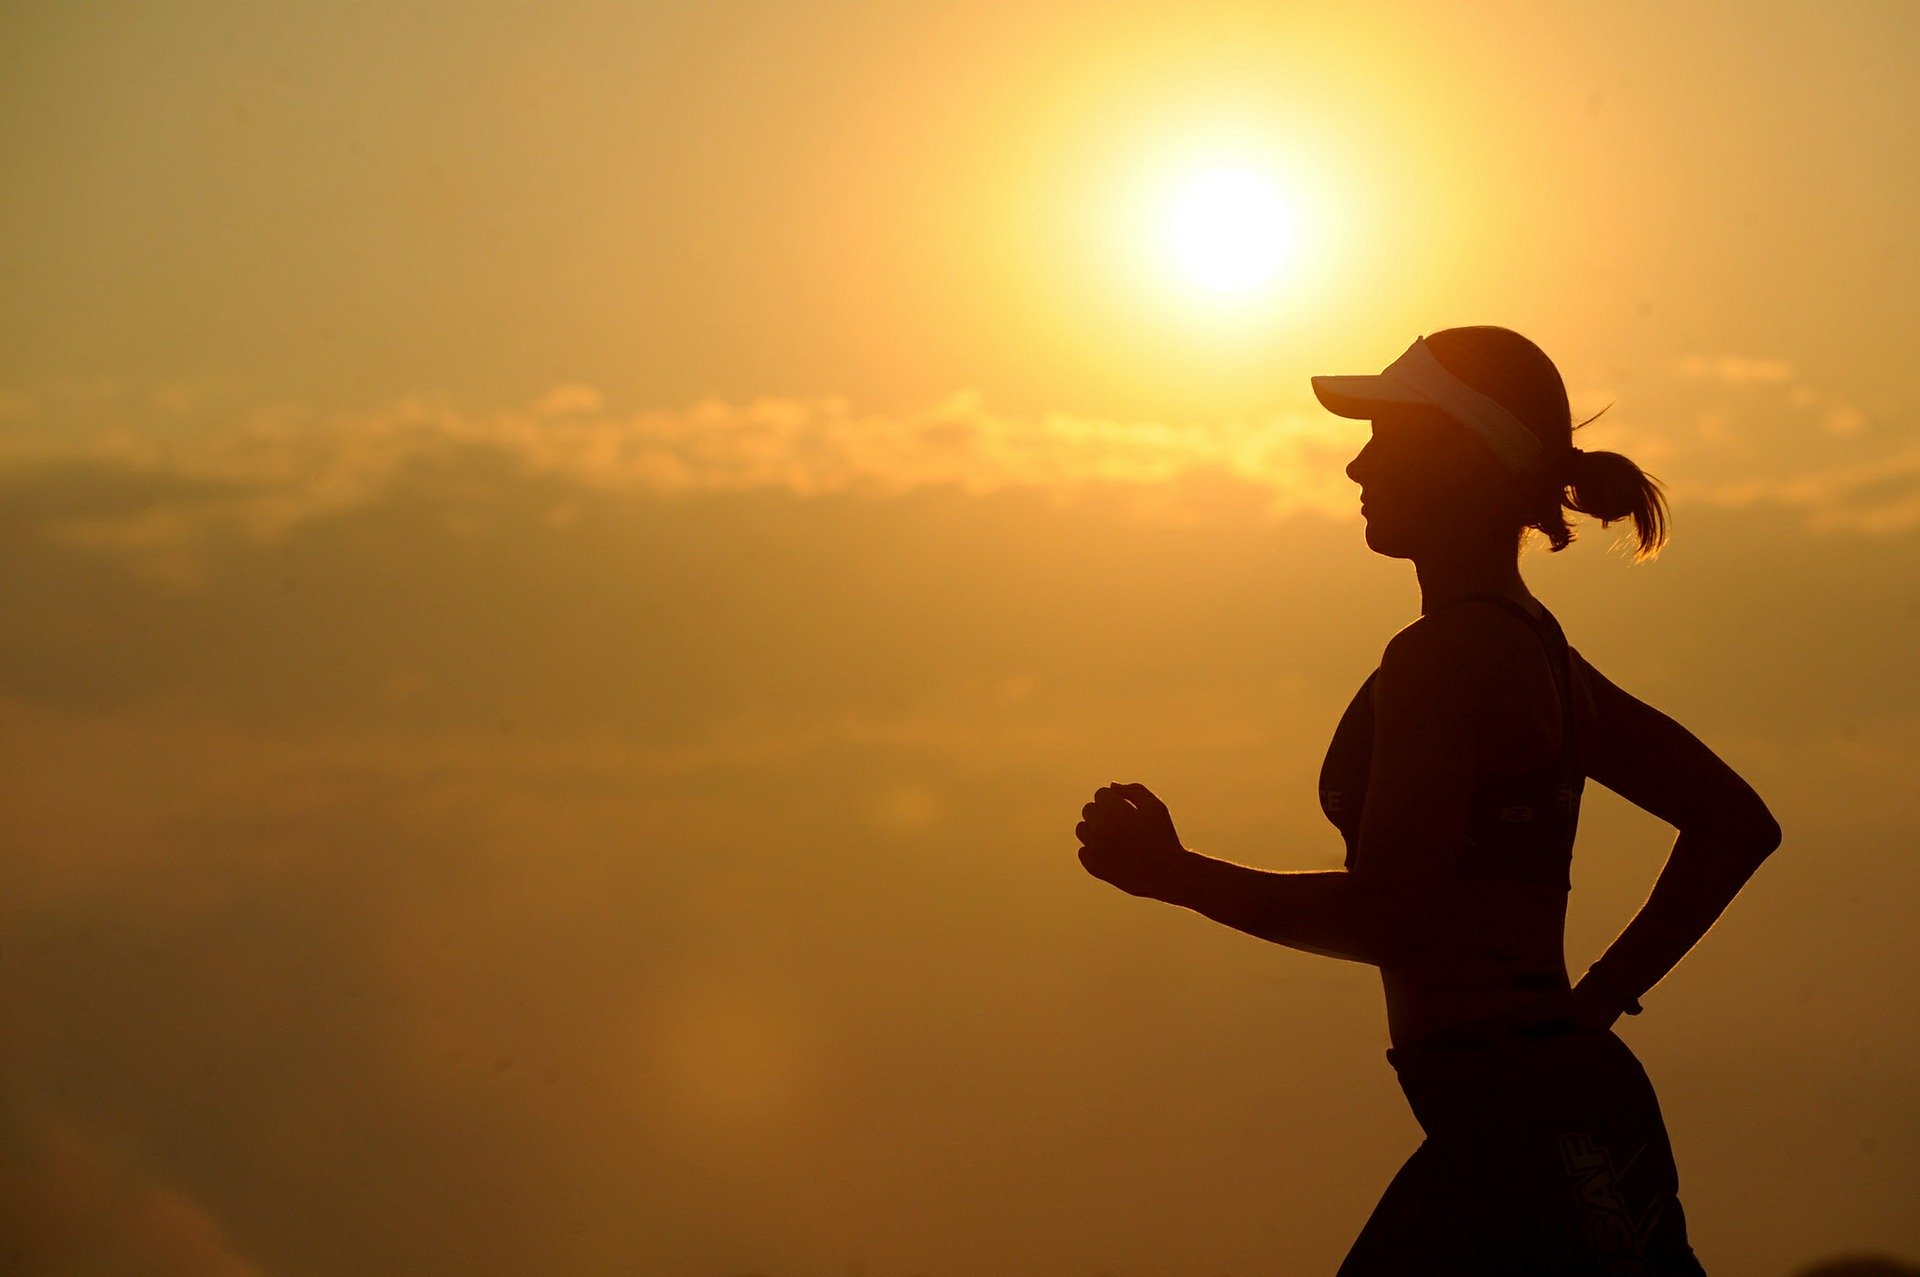 Silhouette of a woman going for a run